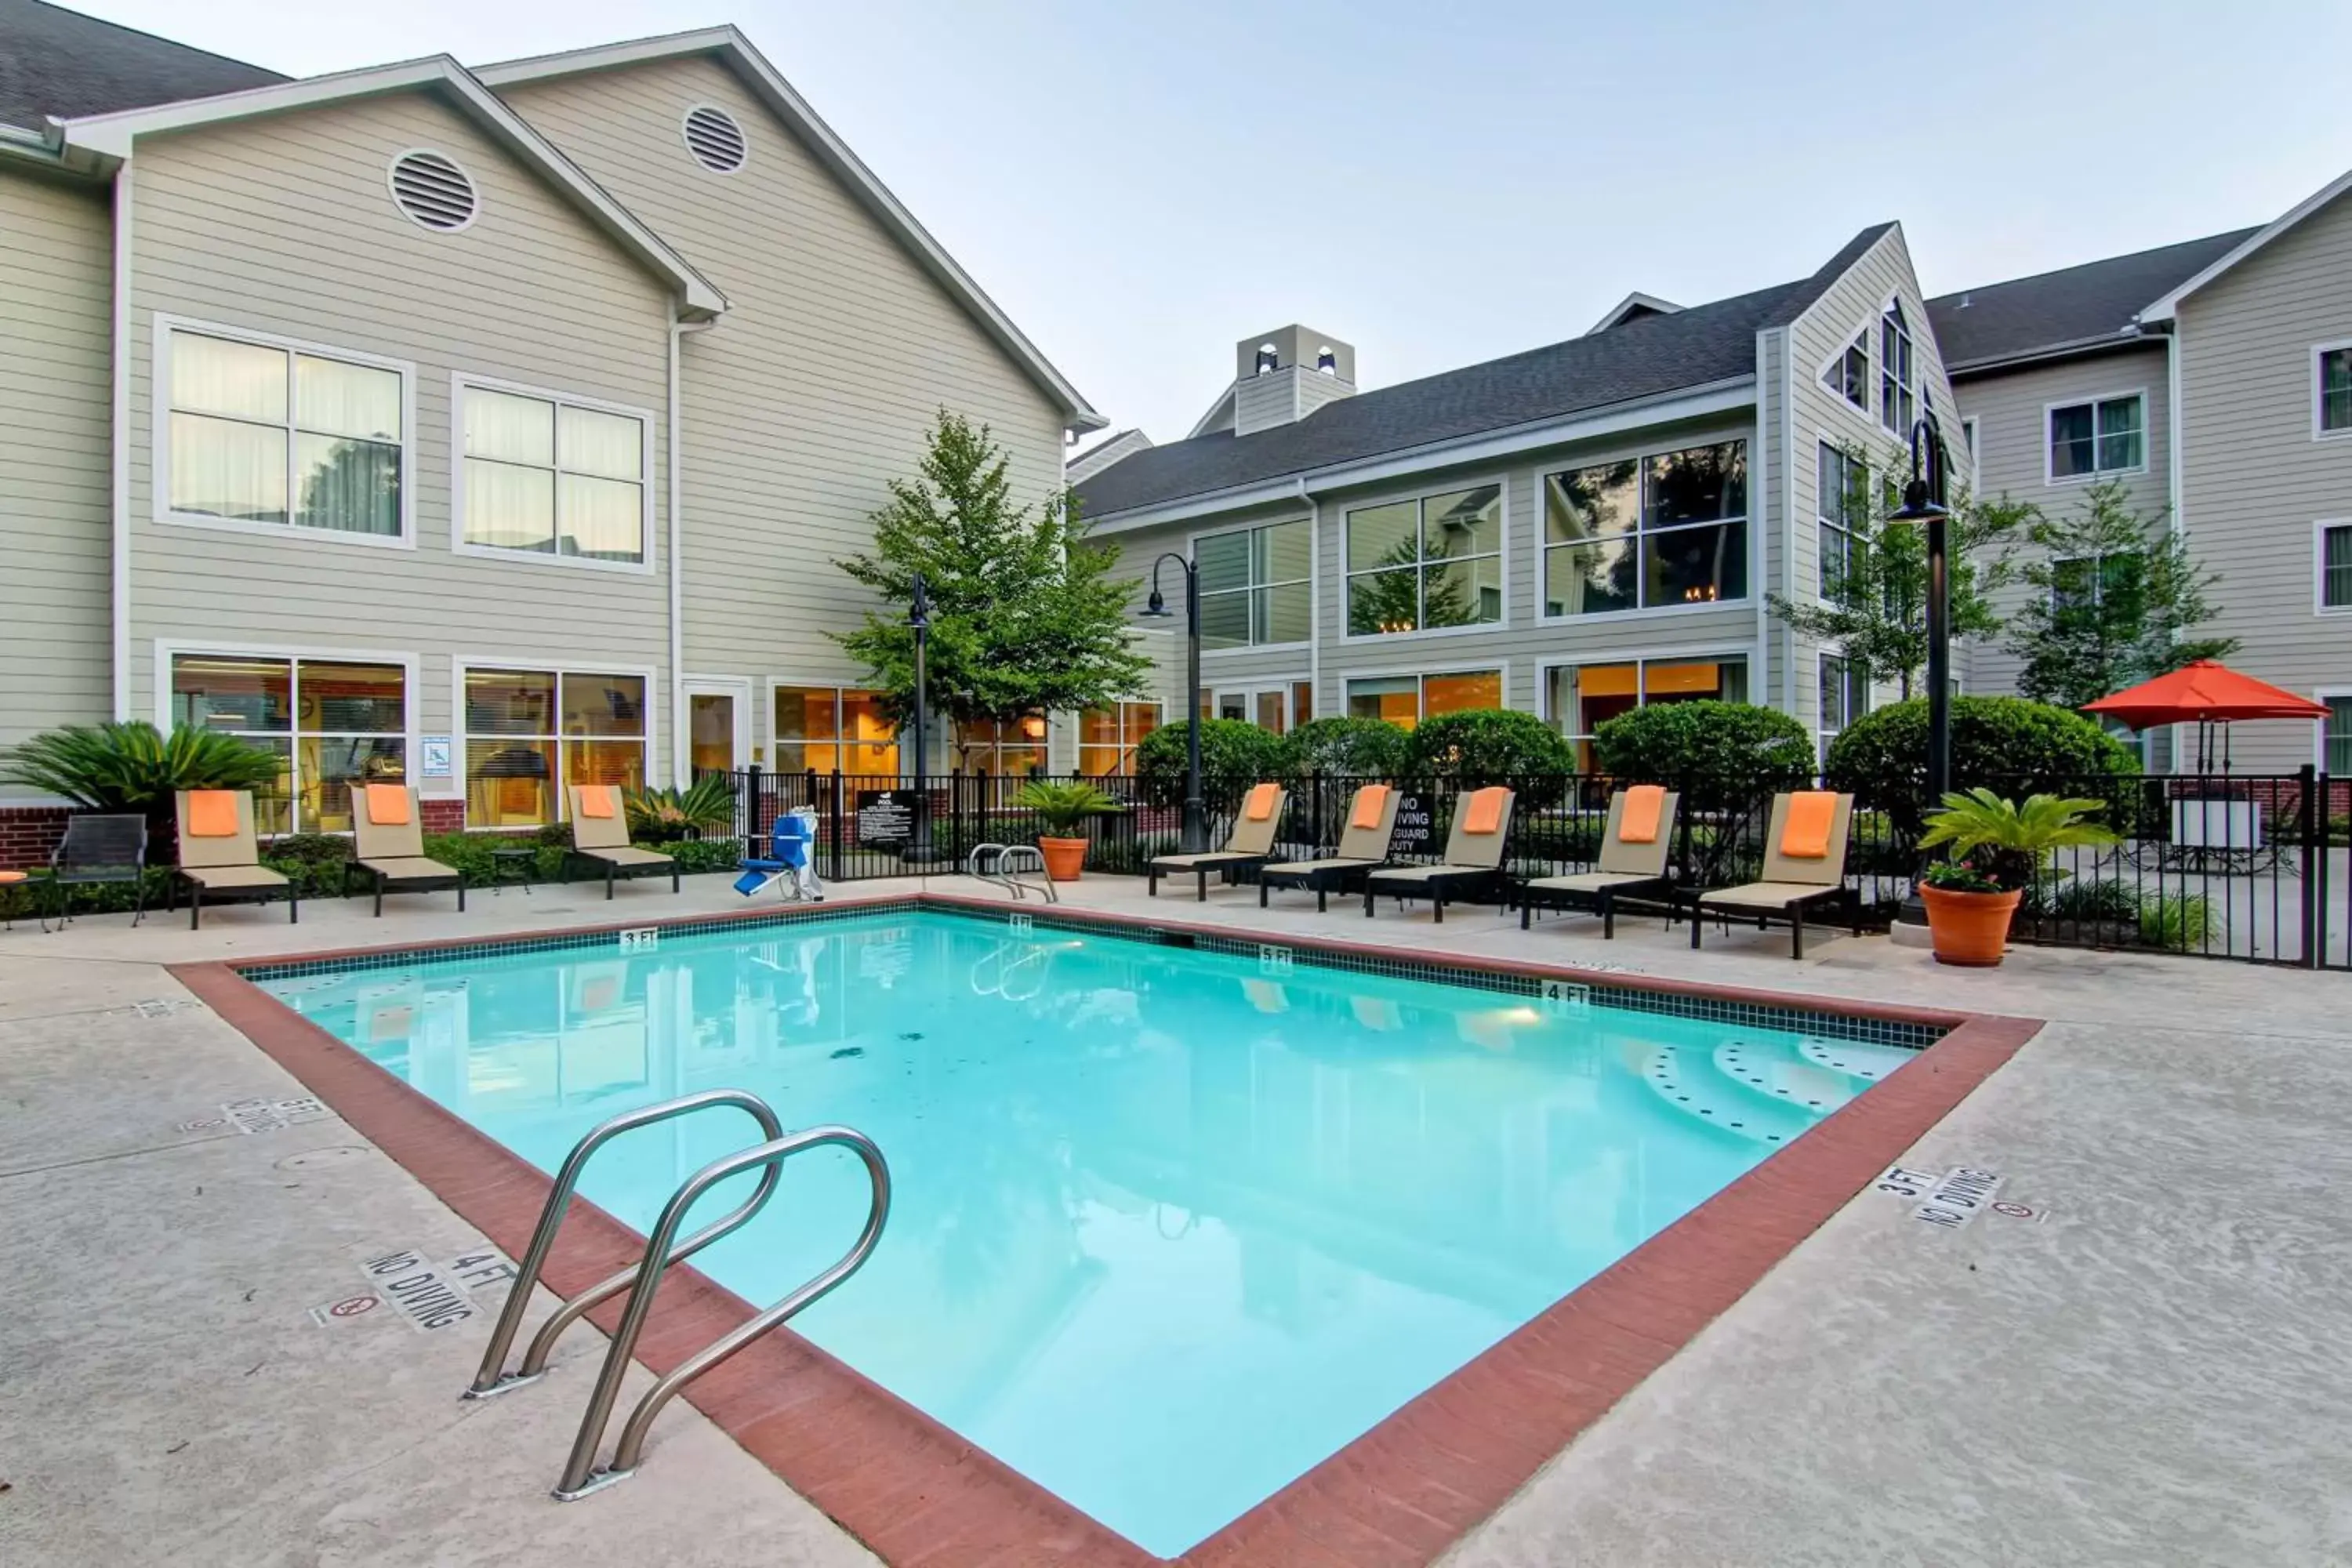 Pool view, Property Building in Homewood Suites Houston Kingwood Parc Airport Area